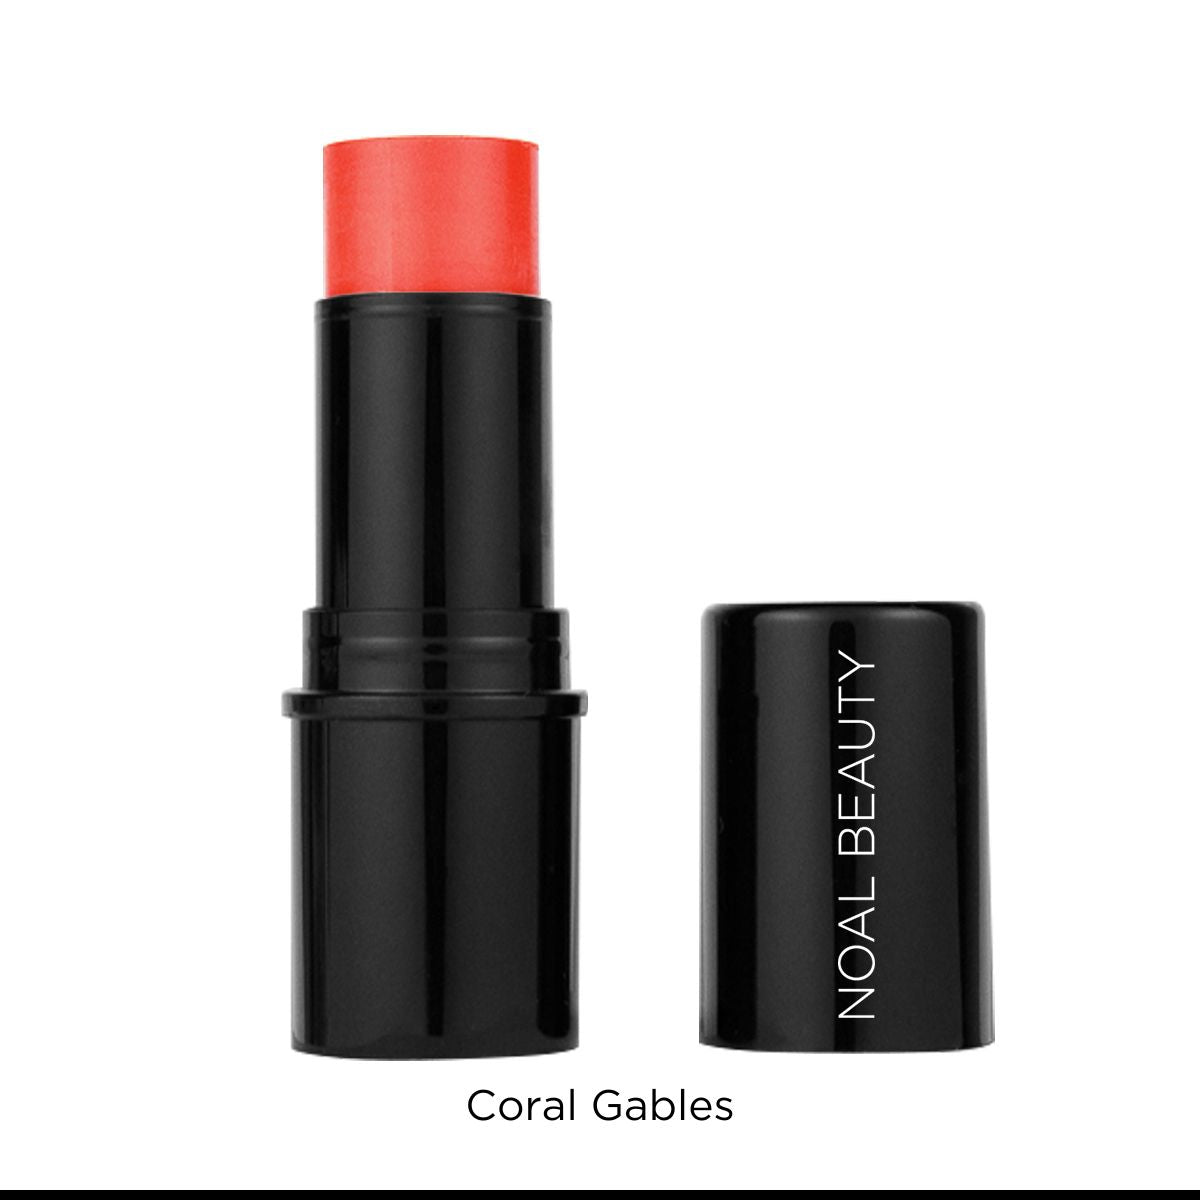 noal-beauty-coral-gables-3-in-1-color-stick-lips-eyes-cheeks